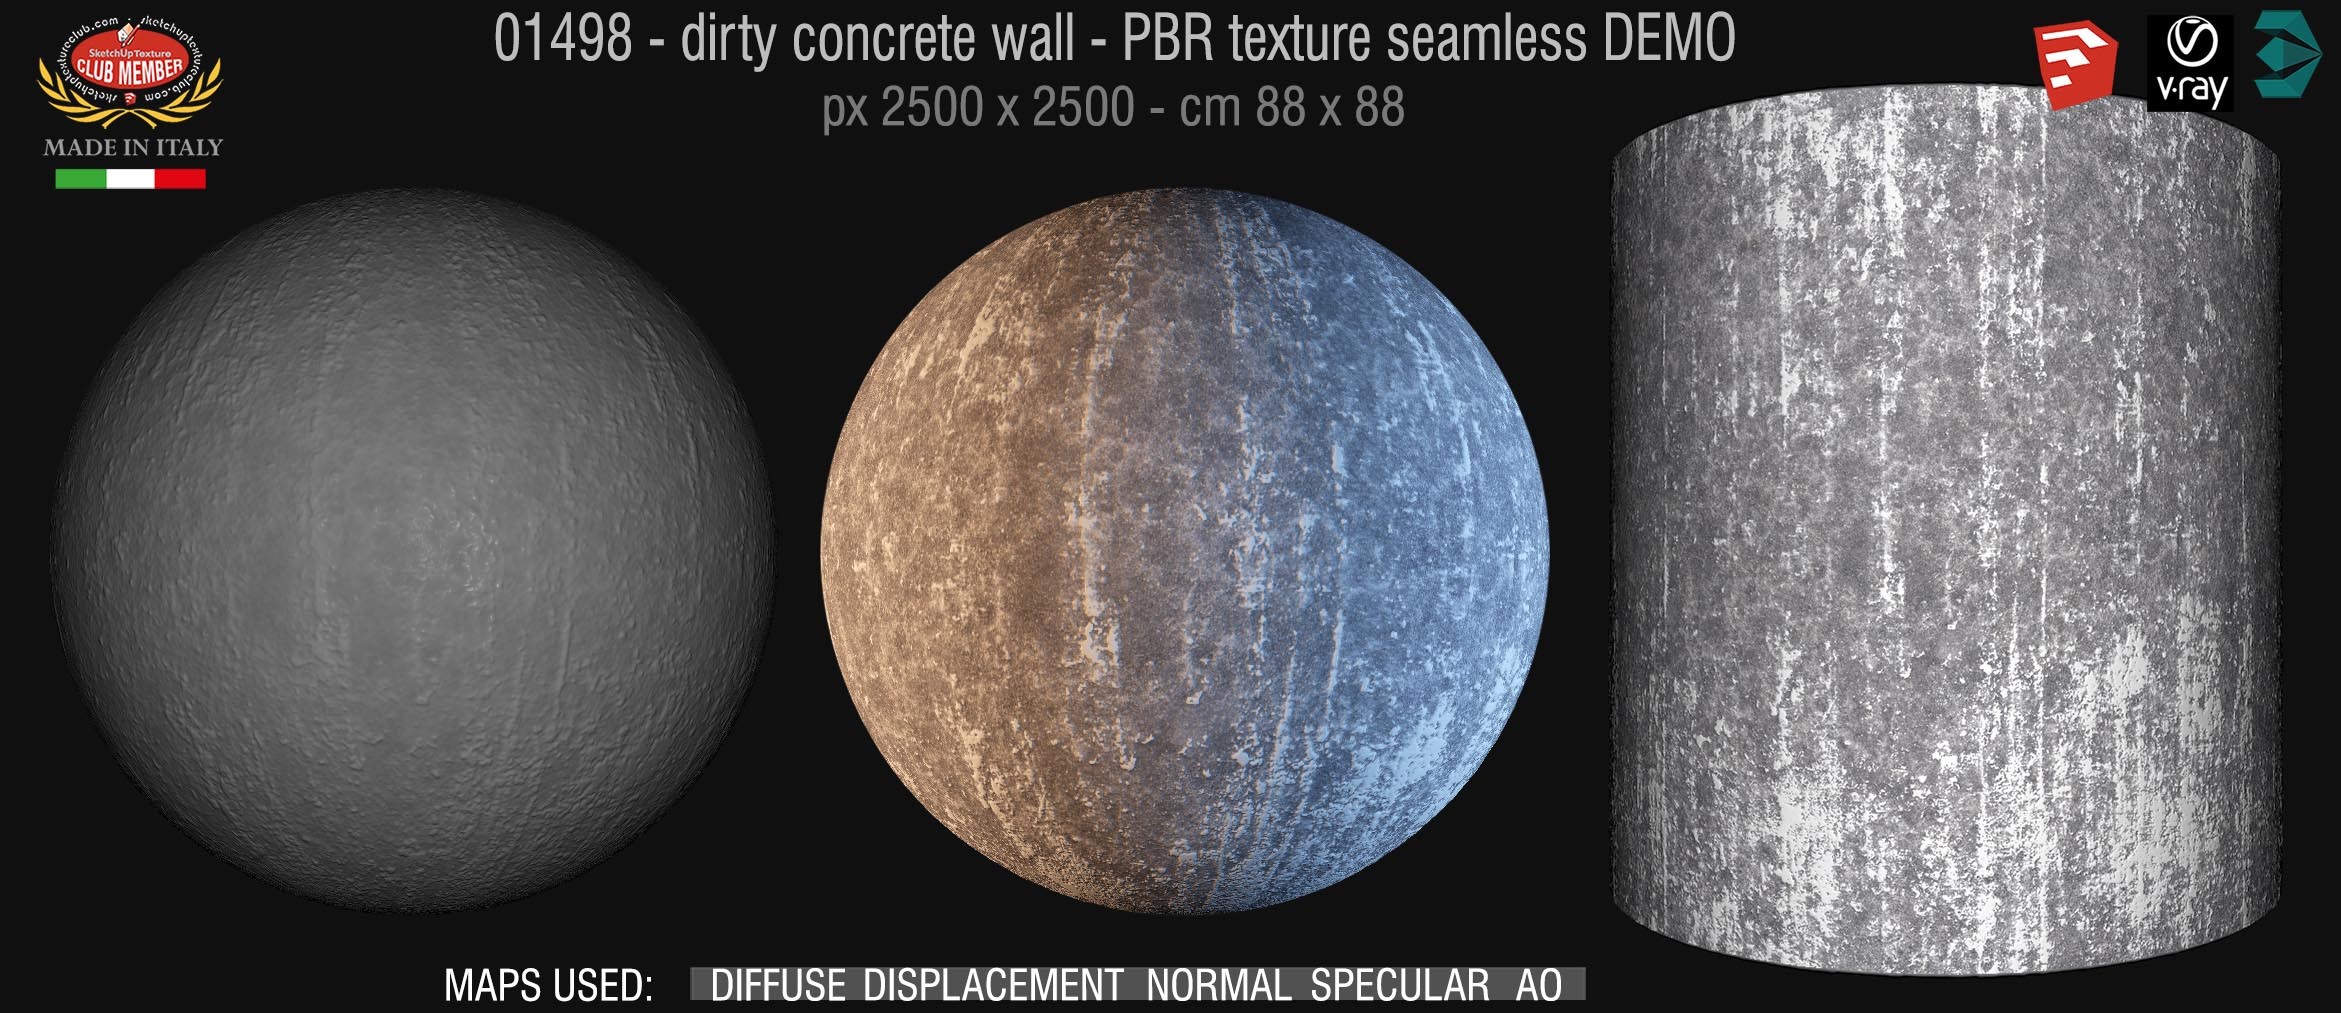 01498 Concrete bare dirty wall PBR texture seamless DEMO